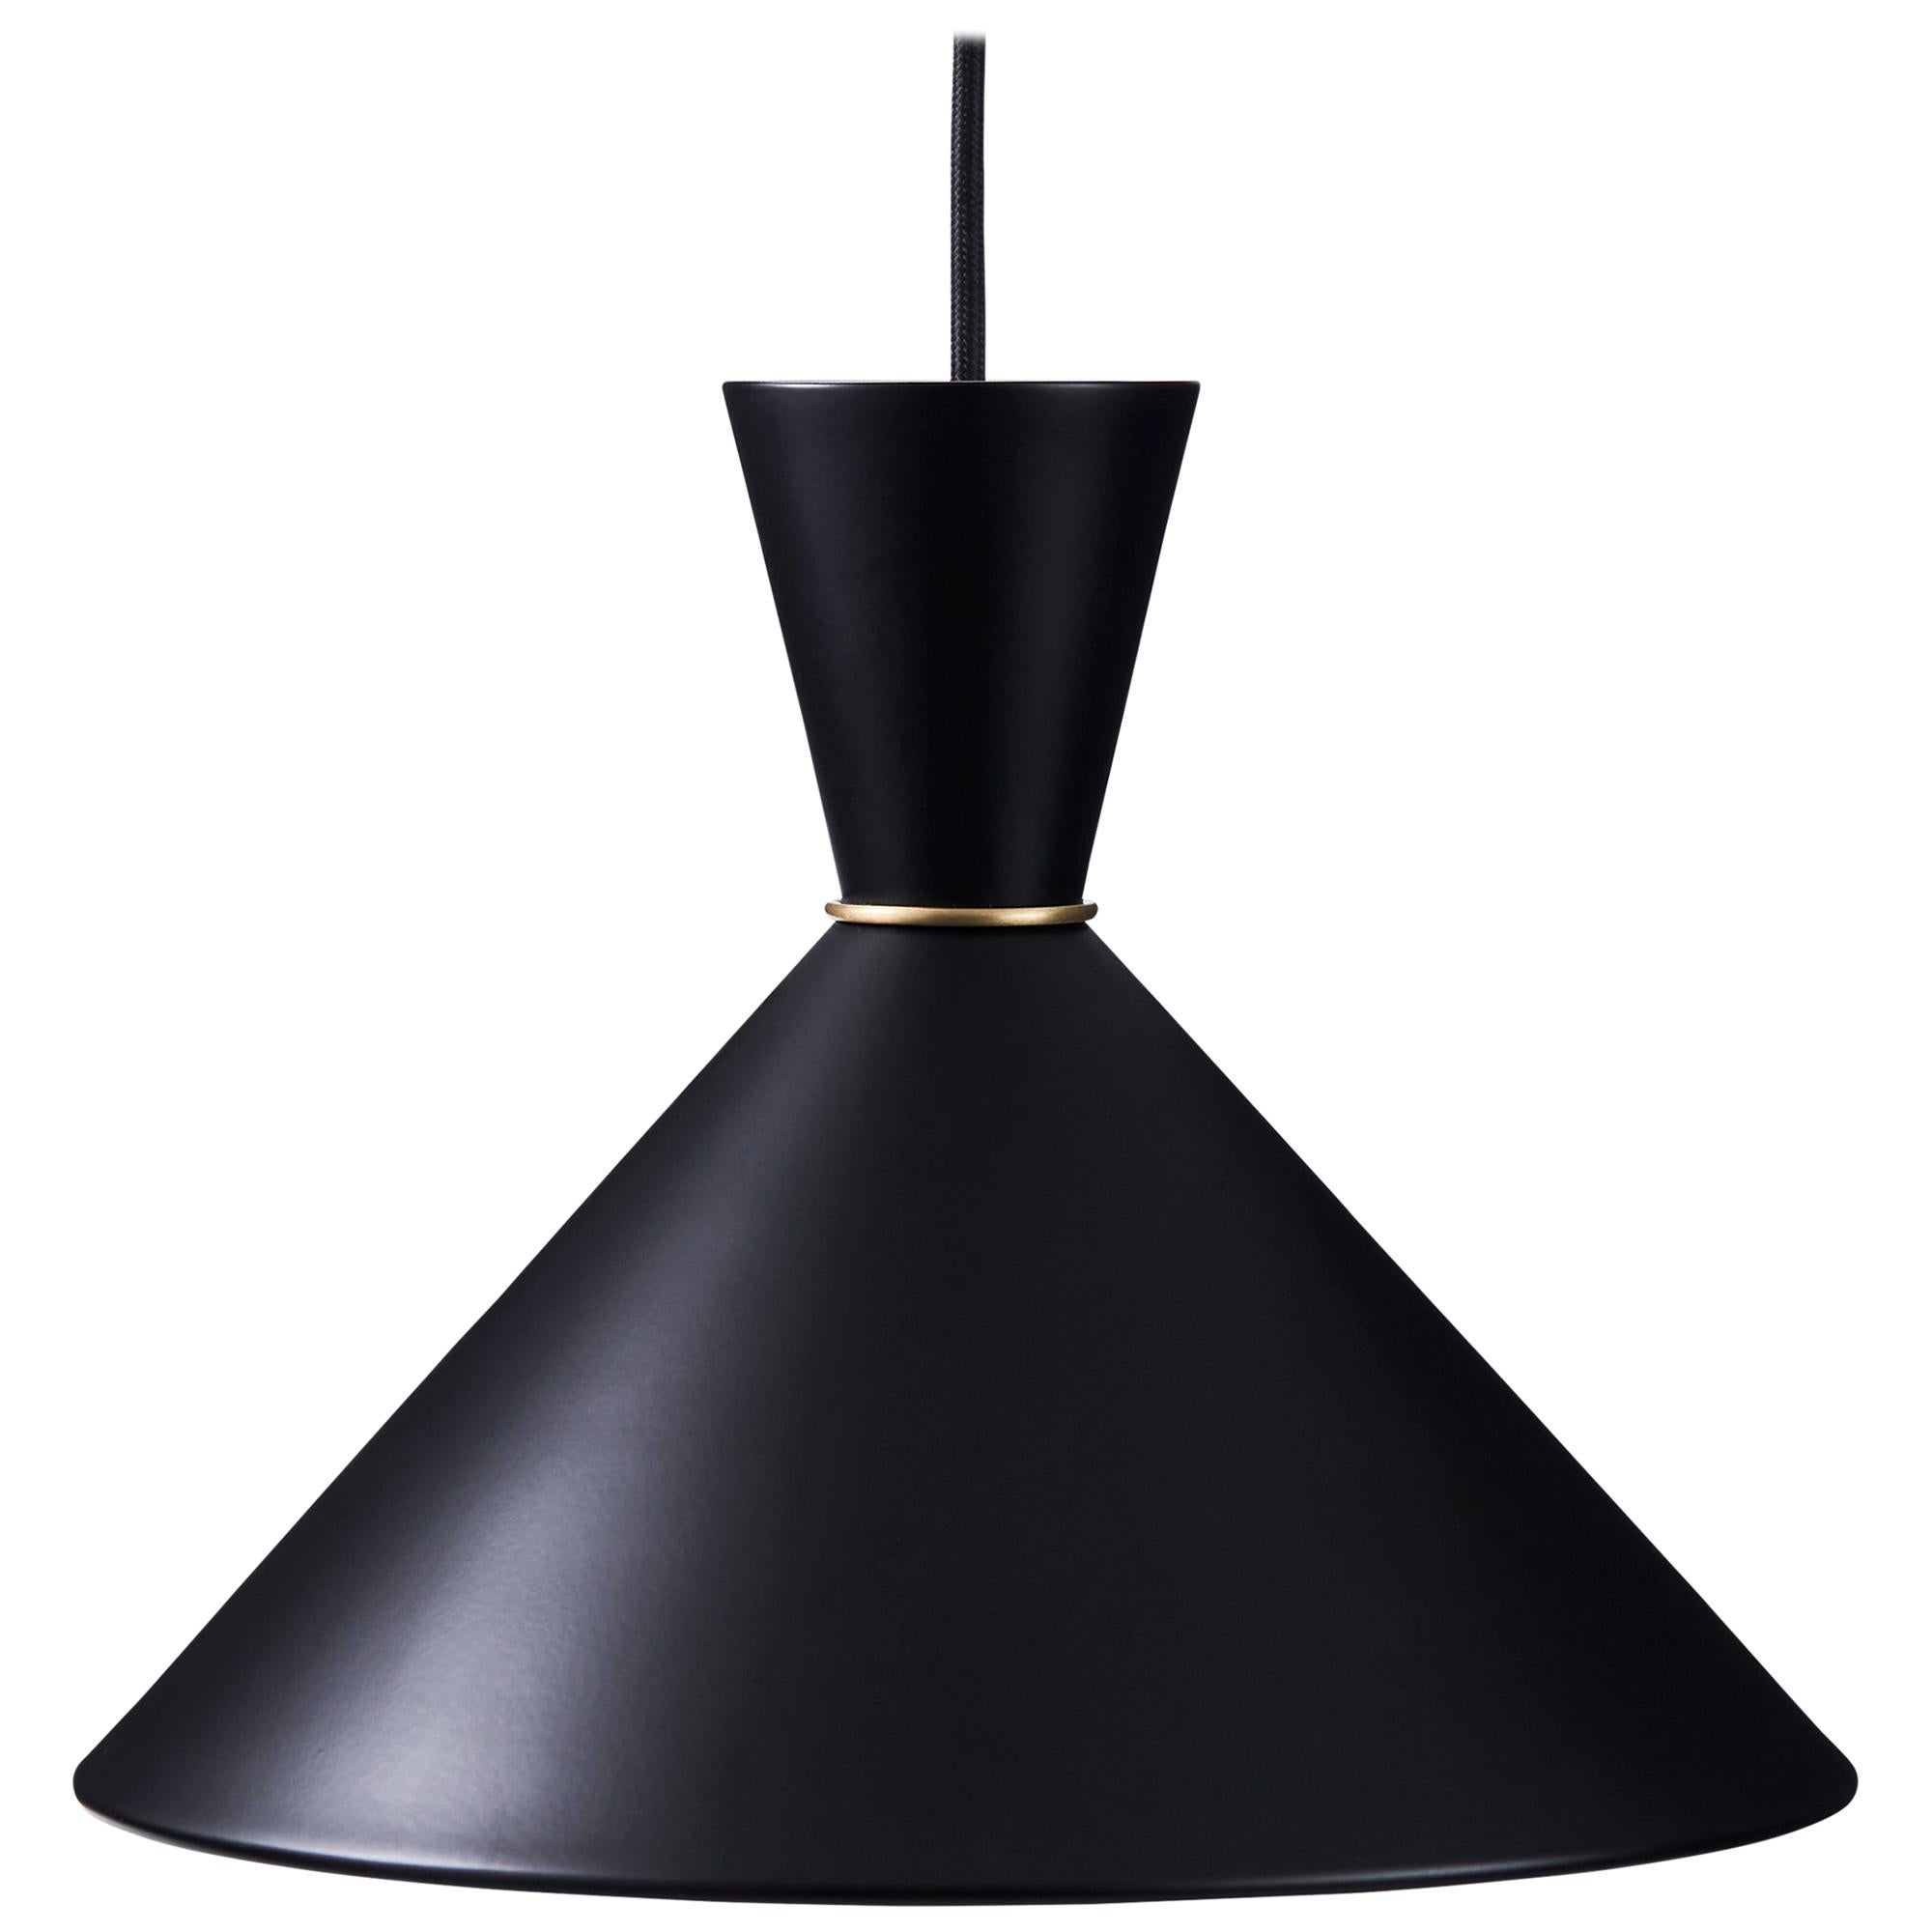 For Sale: Black Bloom Pendant Lamp, by Svend Aage Holm Sorensen from Warm Nordic